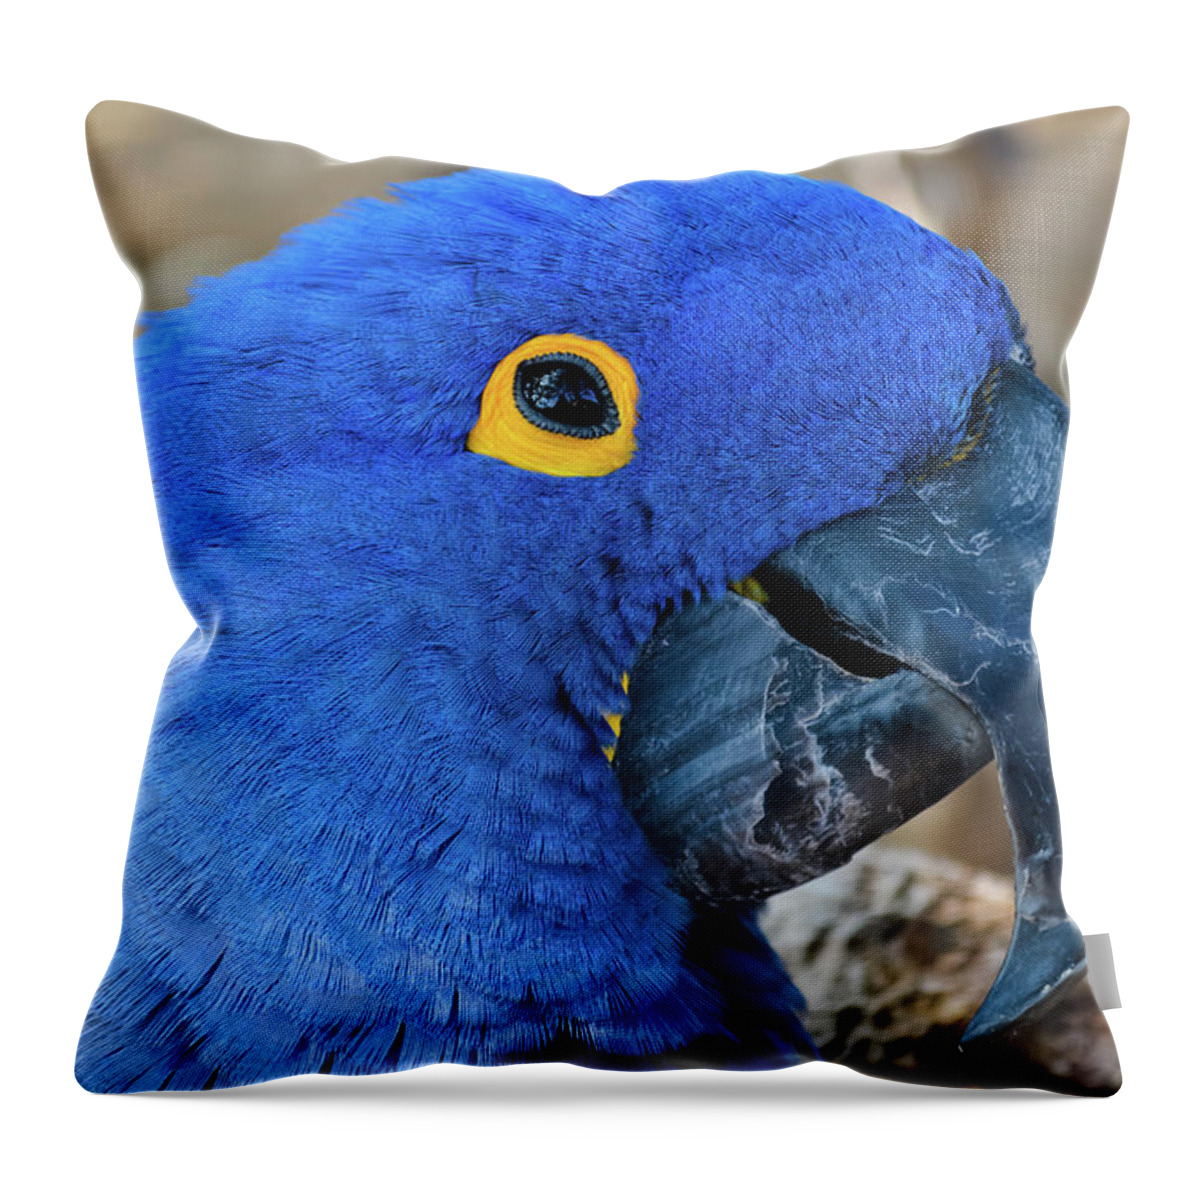 Hyacinth Macaw Throw Pillow featuring the photograph Hyacinth Macaw by Kyle Hanson